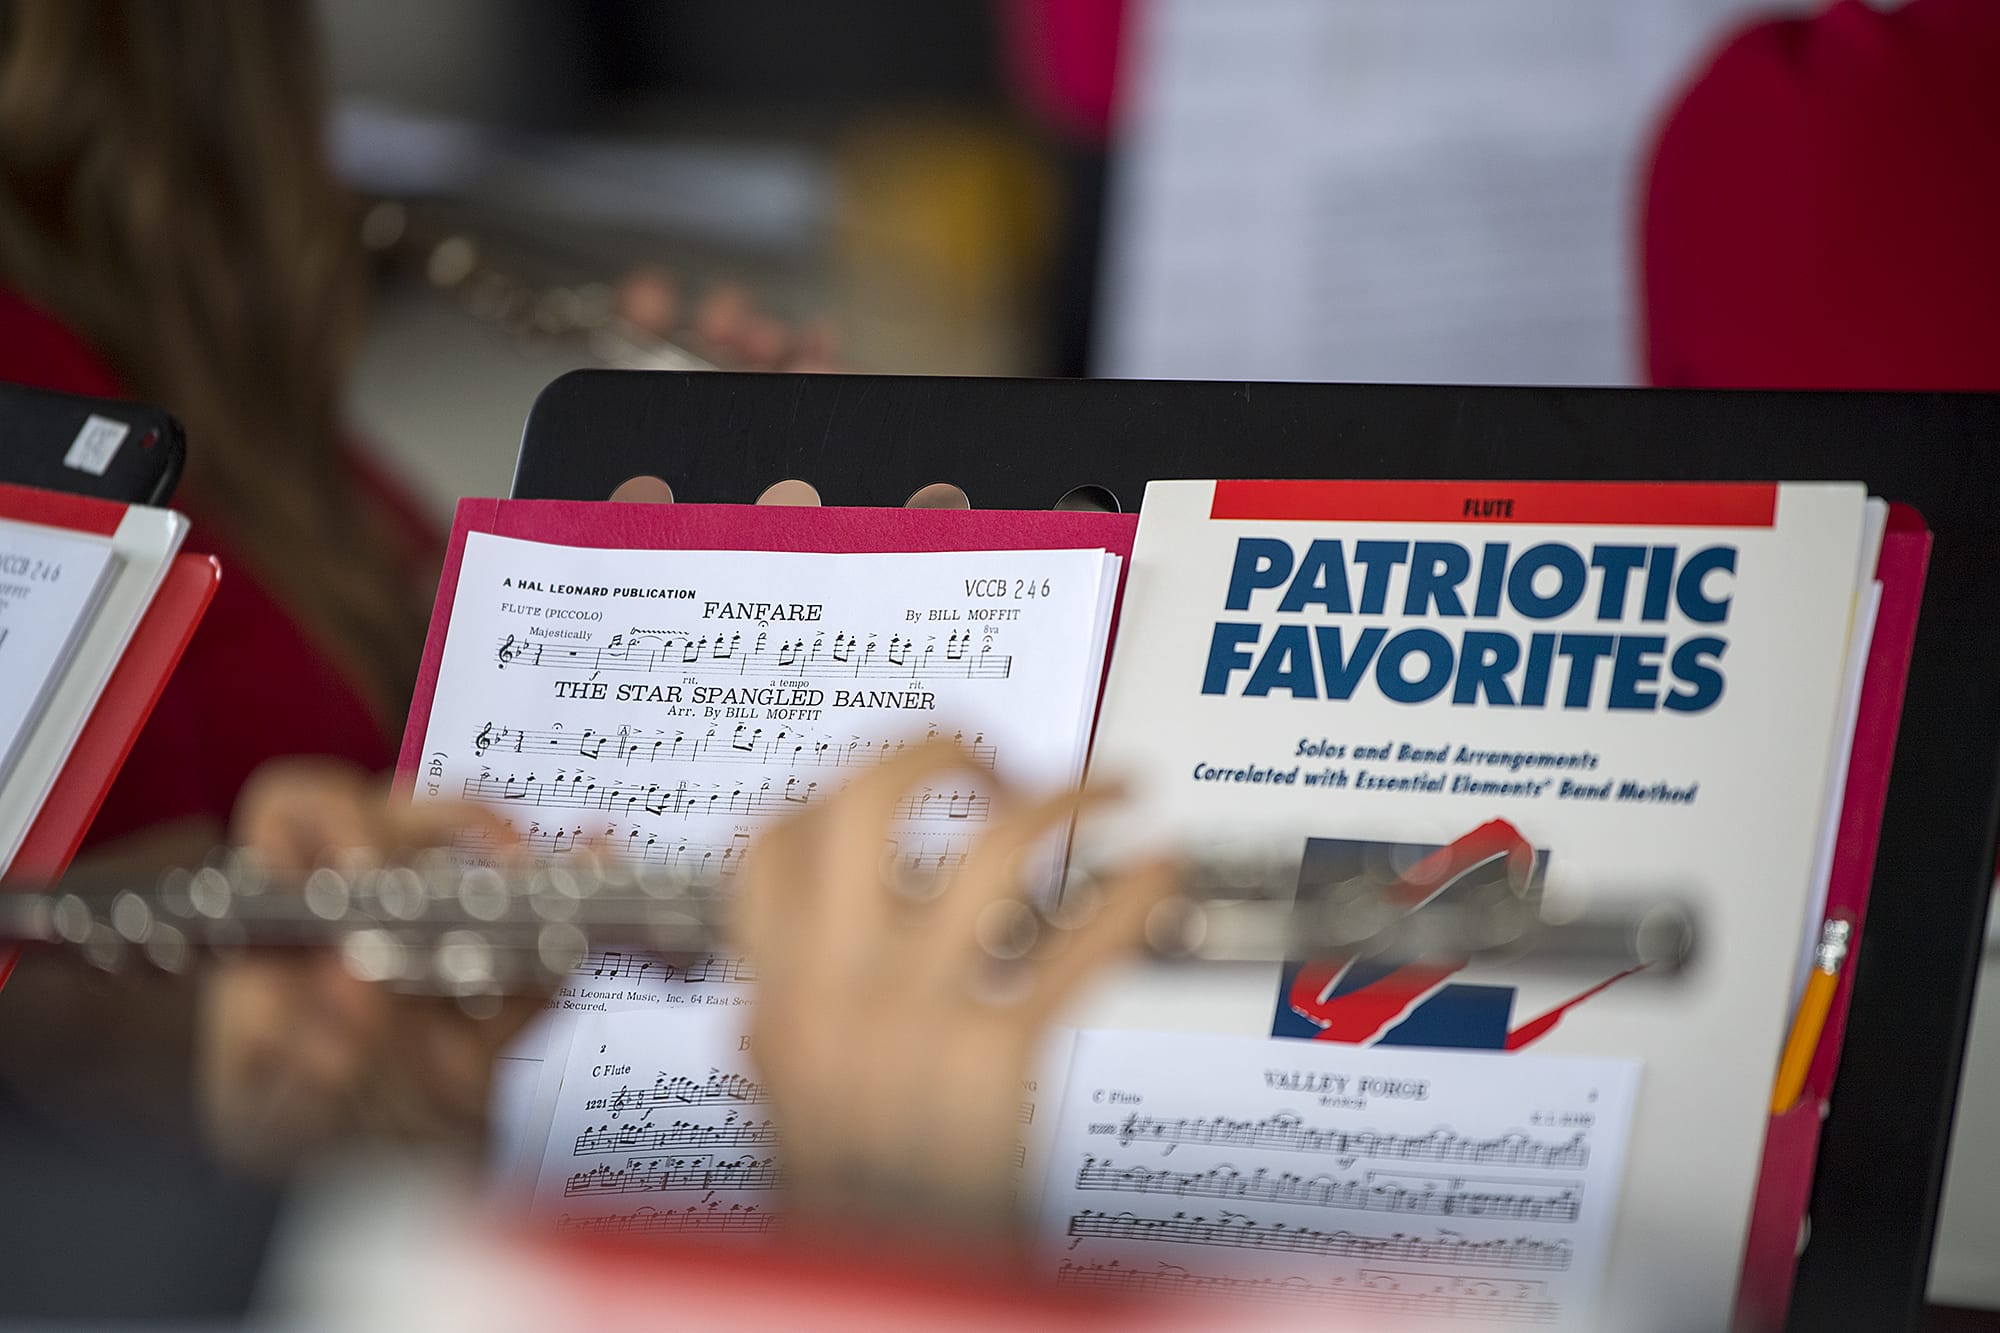 The Vancouver Community Concert Band plays classic songs such as the "Star Spangled Banner" during the Special Naturalization Ceremony on Wednesday afternoon, July 3, 2019.